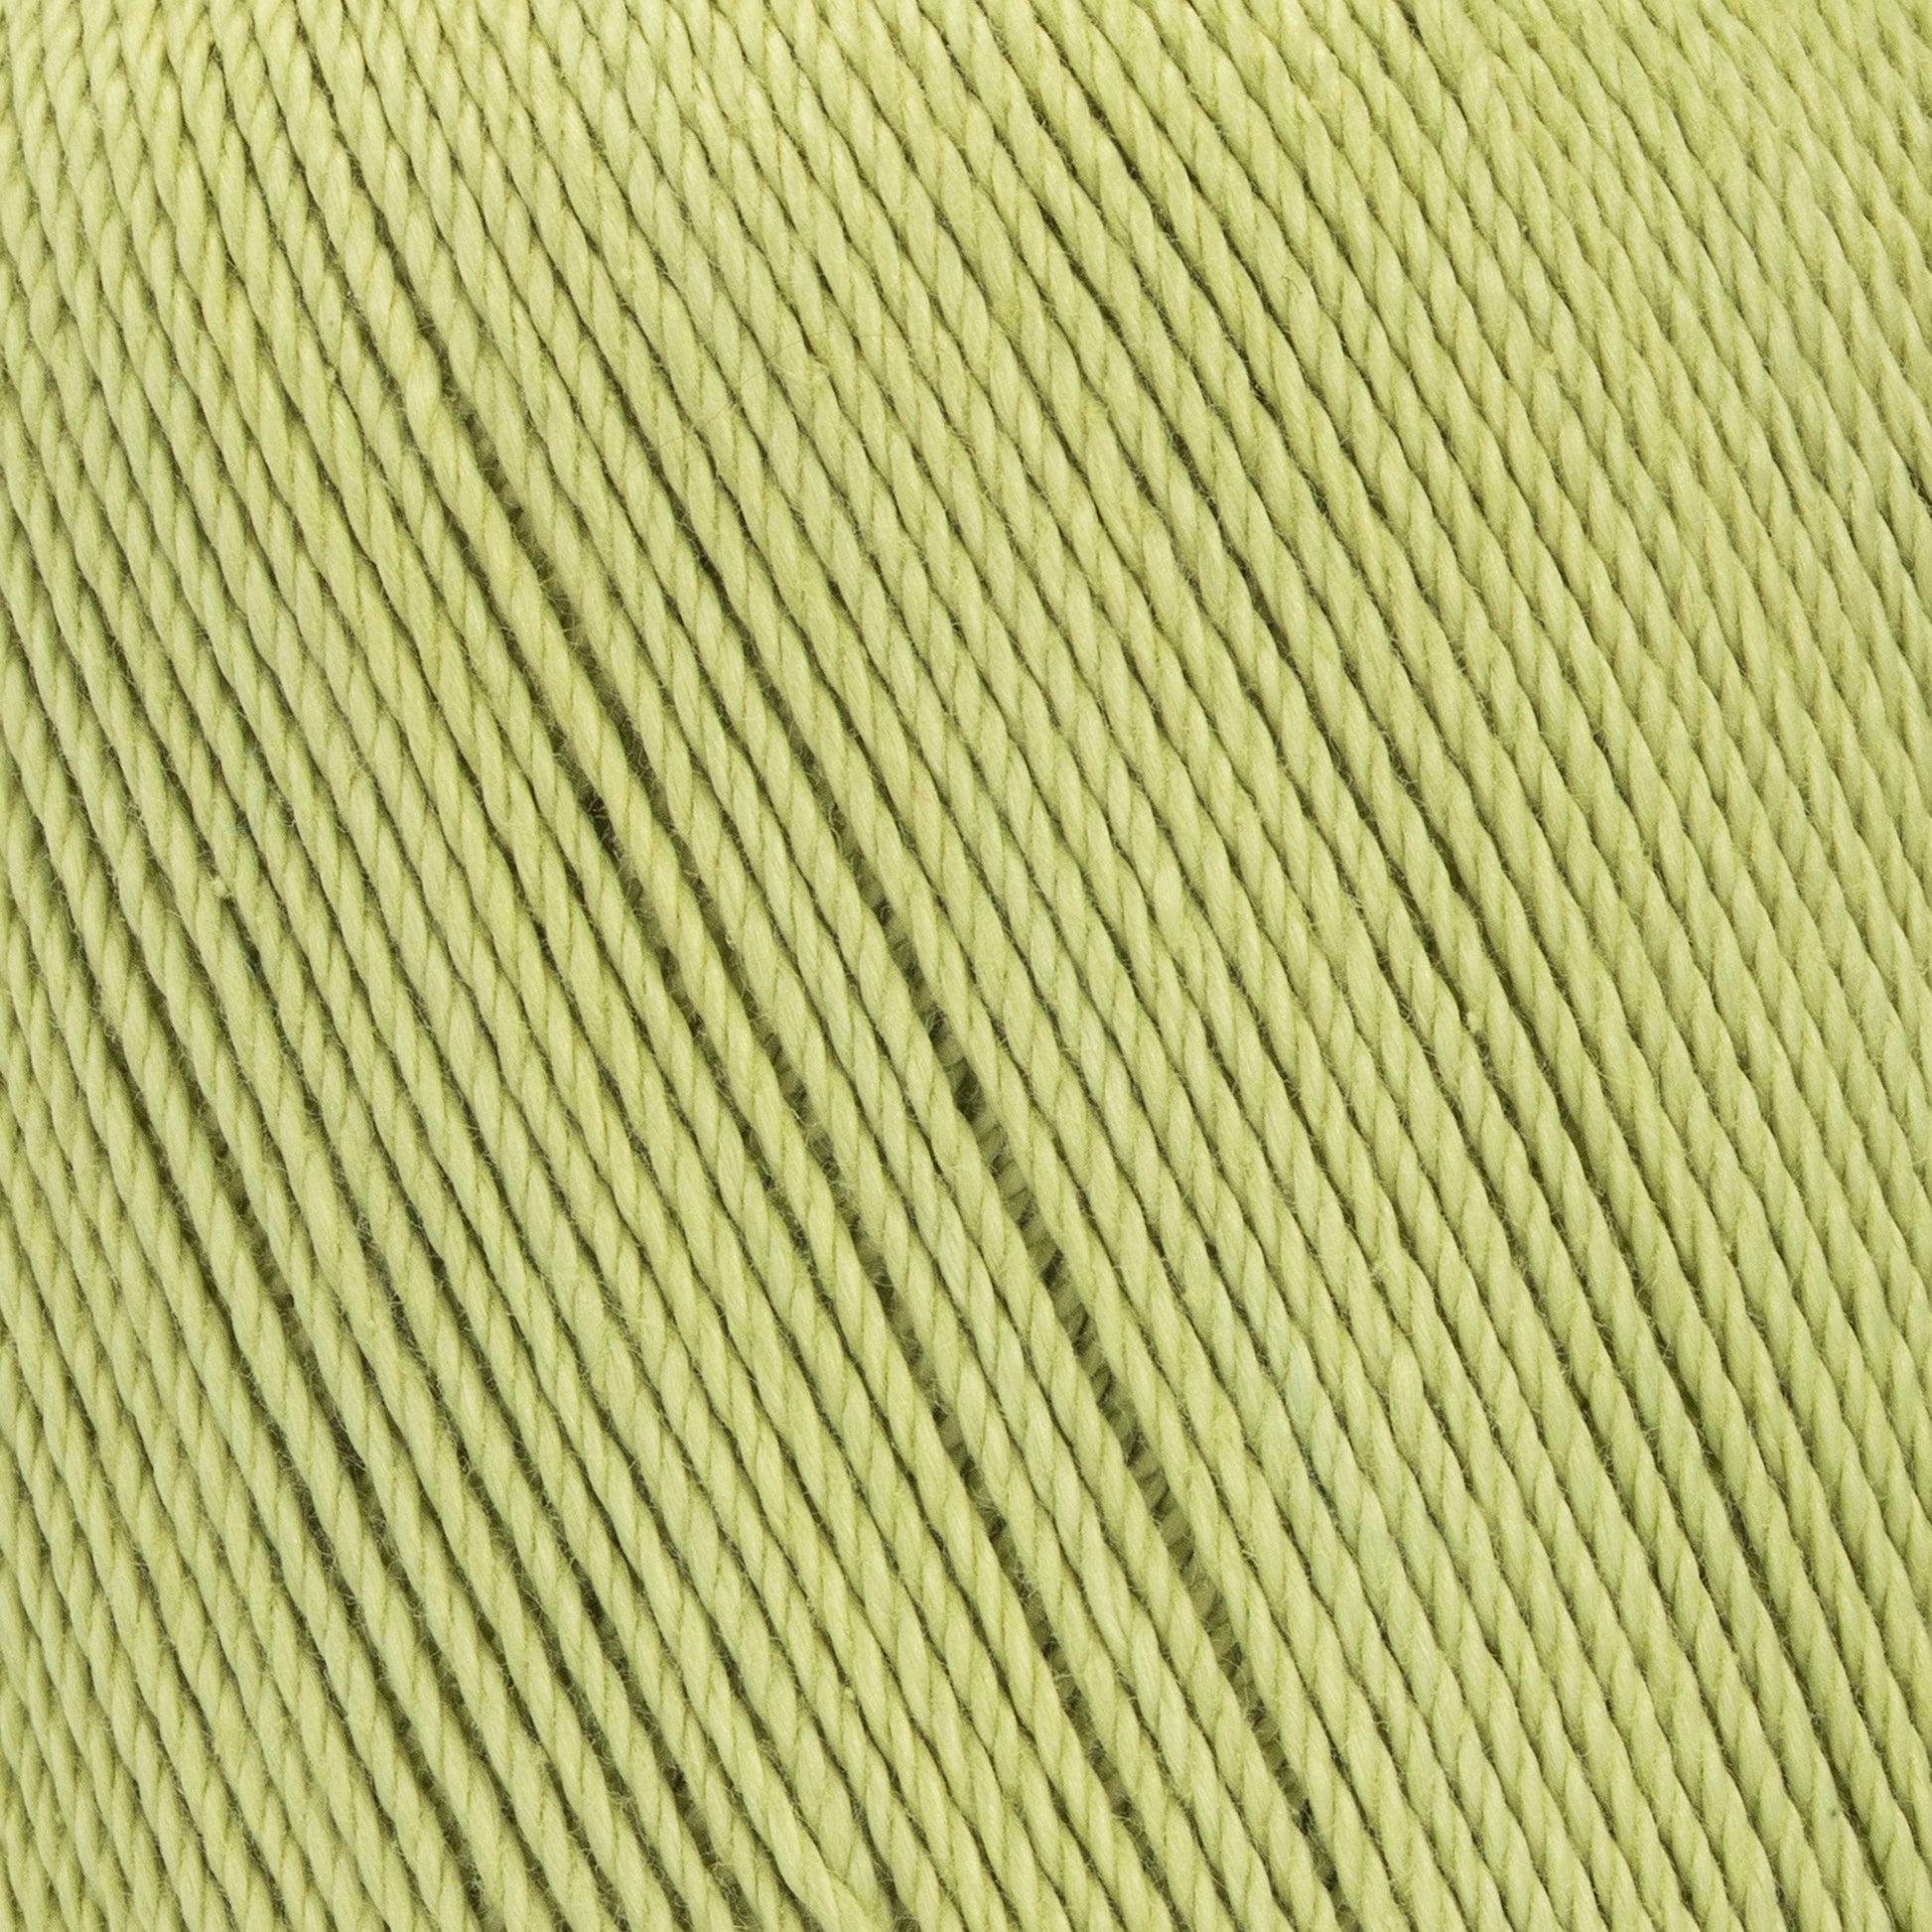 Aunt Lydia's Fashion Crochet Thread Size 3 Lime Ombre